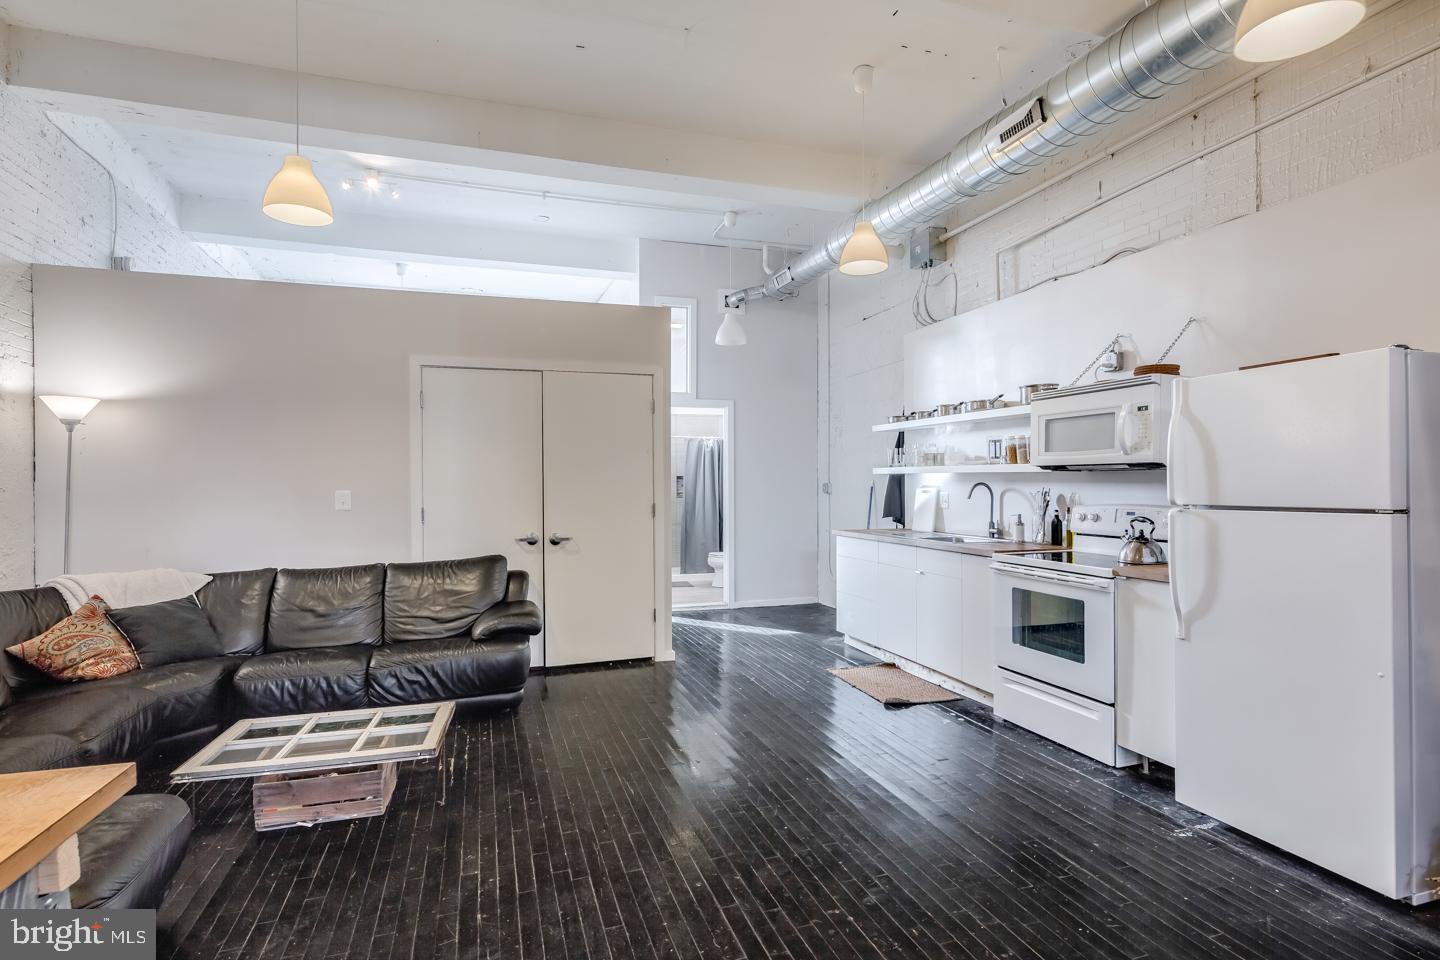 a living room with stainless steel appliances furniture and a wooden floor